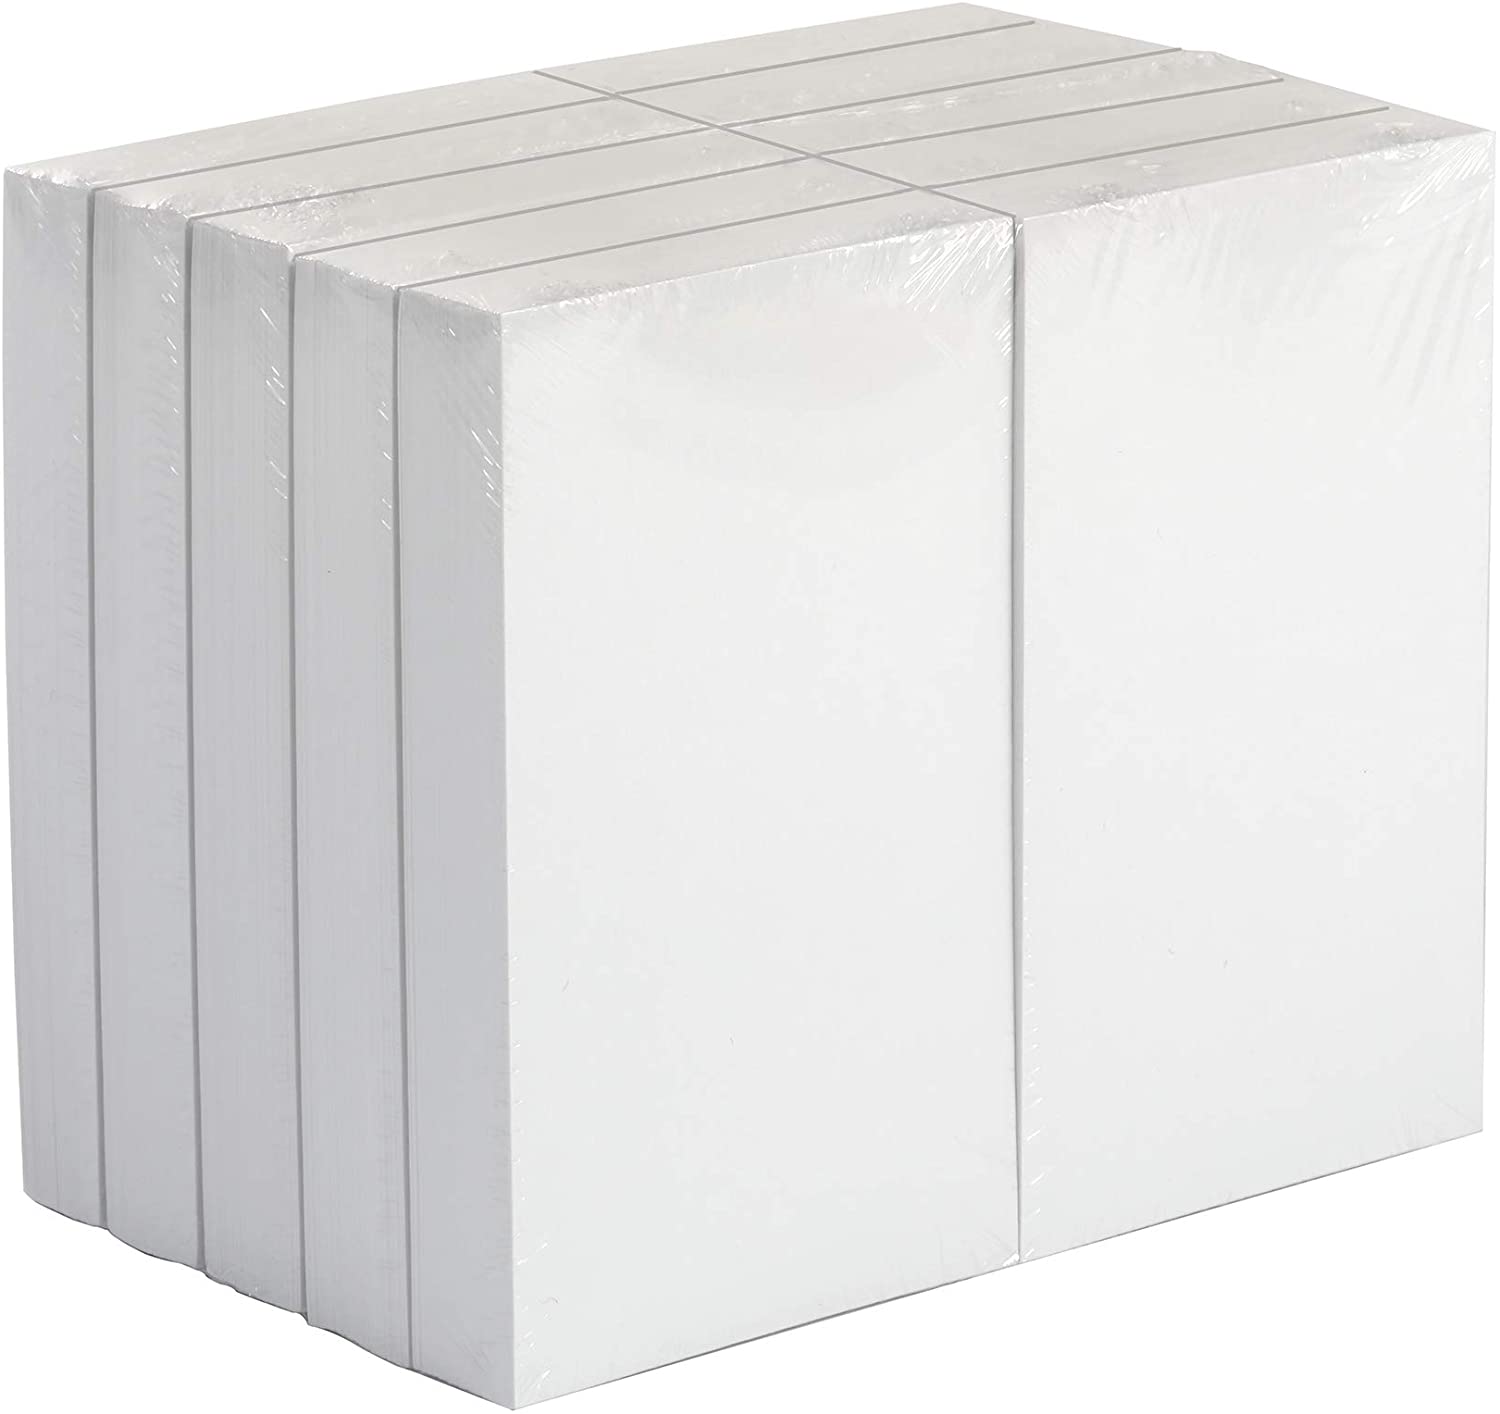 61400A Oxford Self-Stick Index Cards White Premium Weight Paper 400 Pack 3 x 5 Inch Ruled 